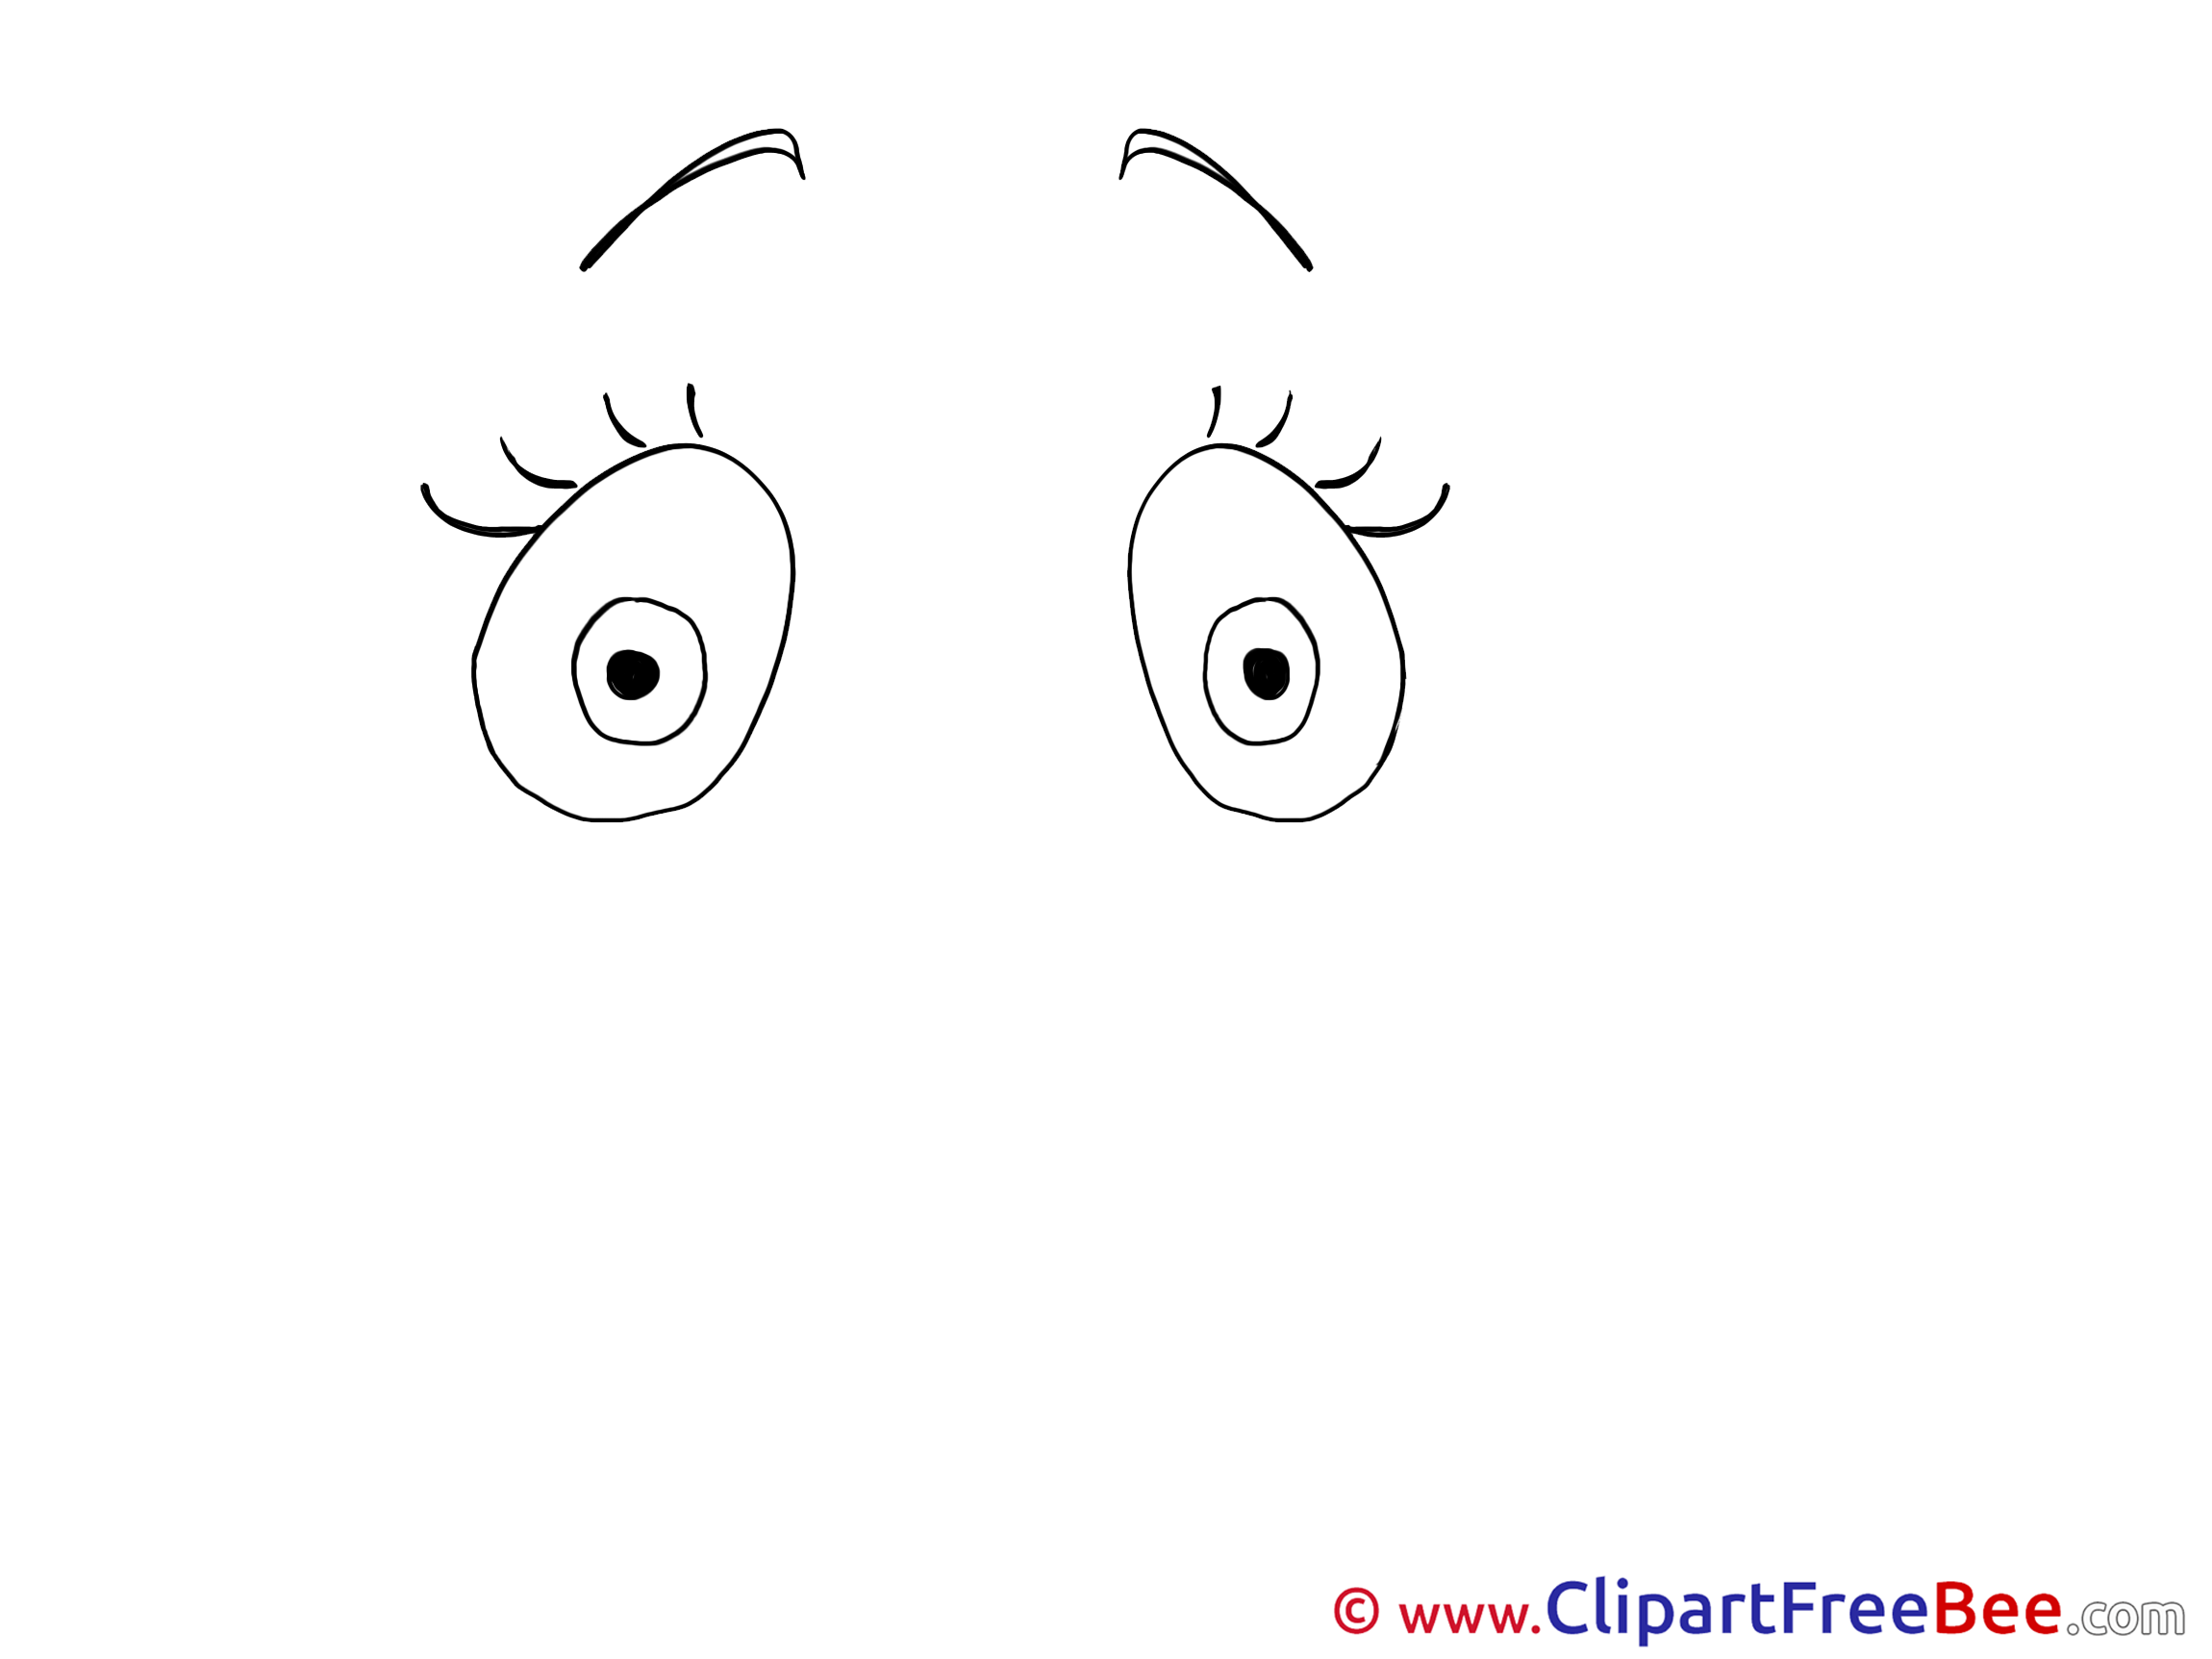 Big Eyes download Clip Art for free